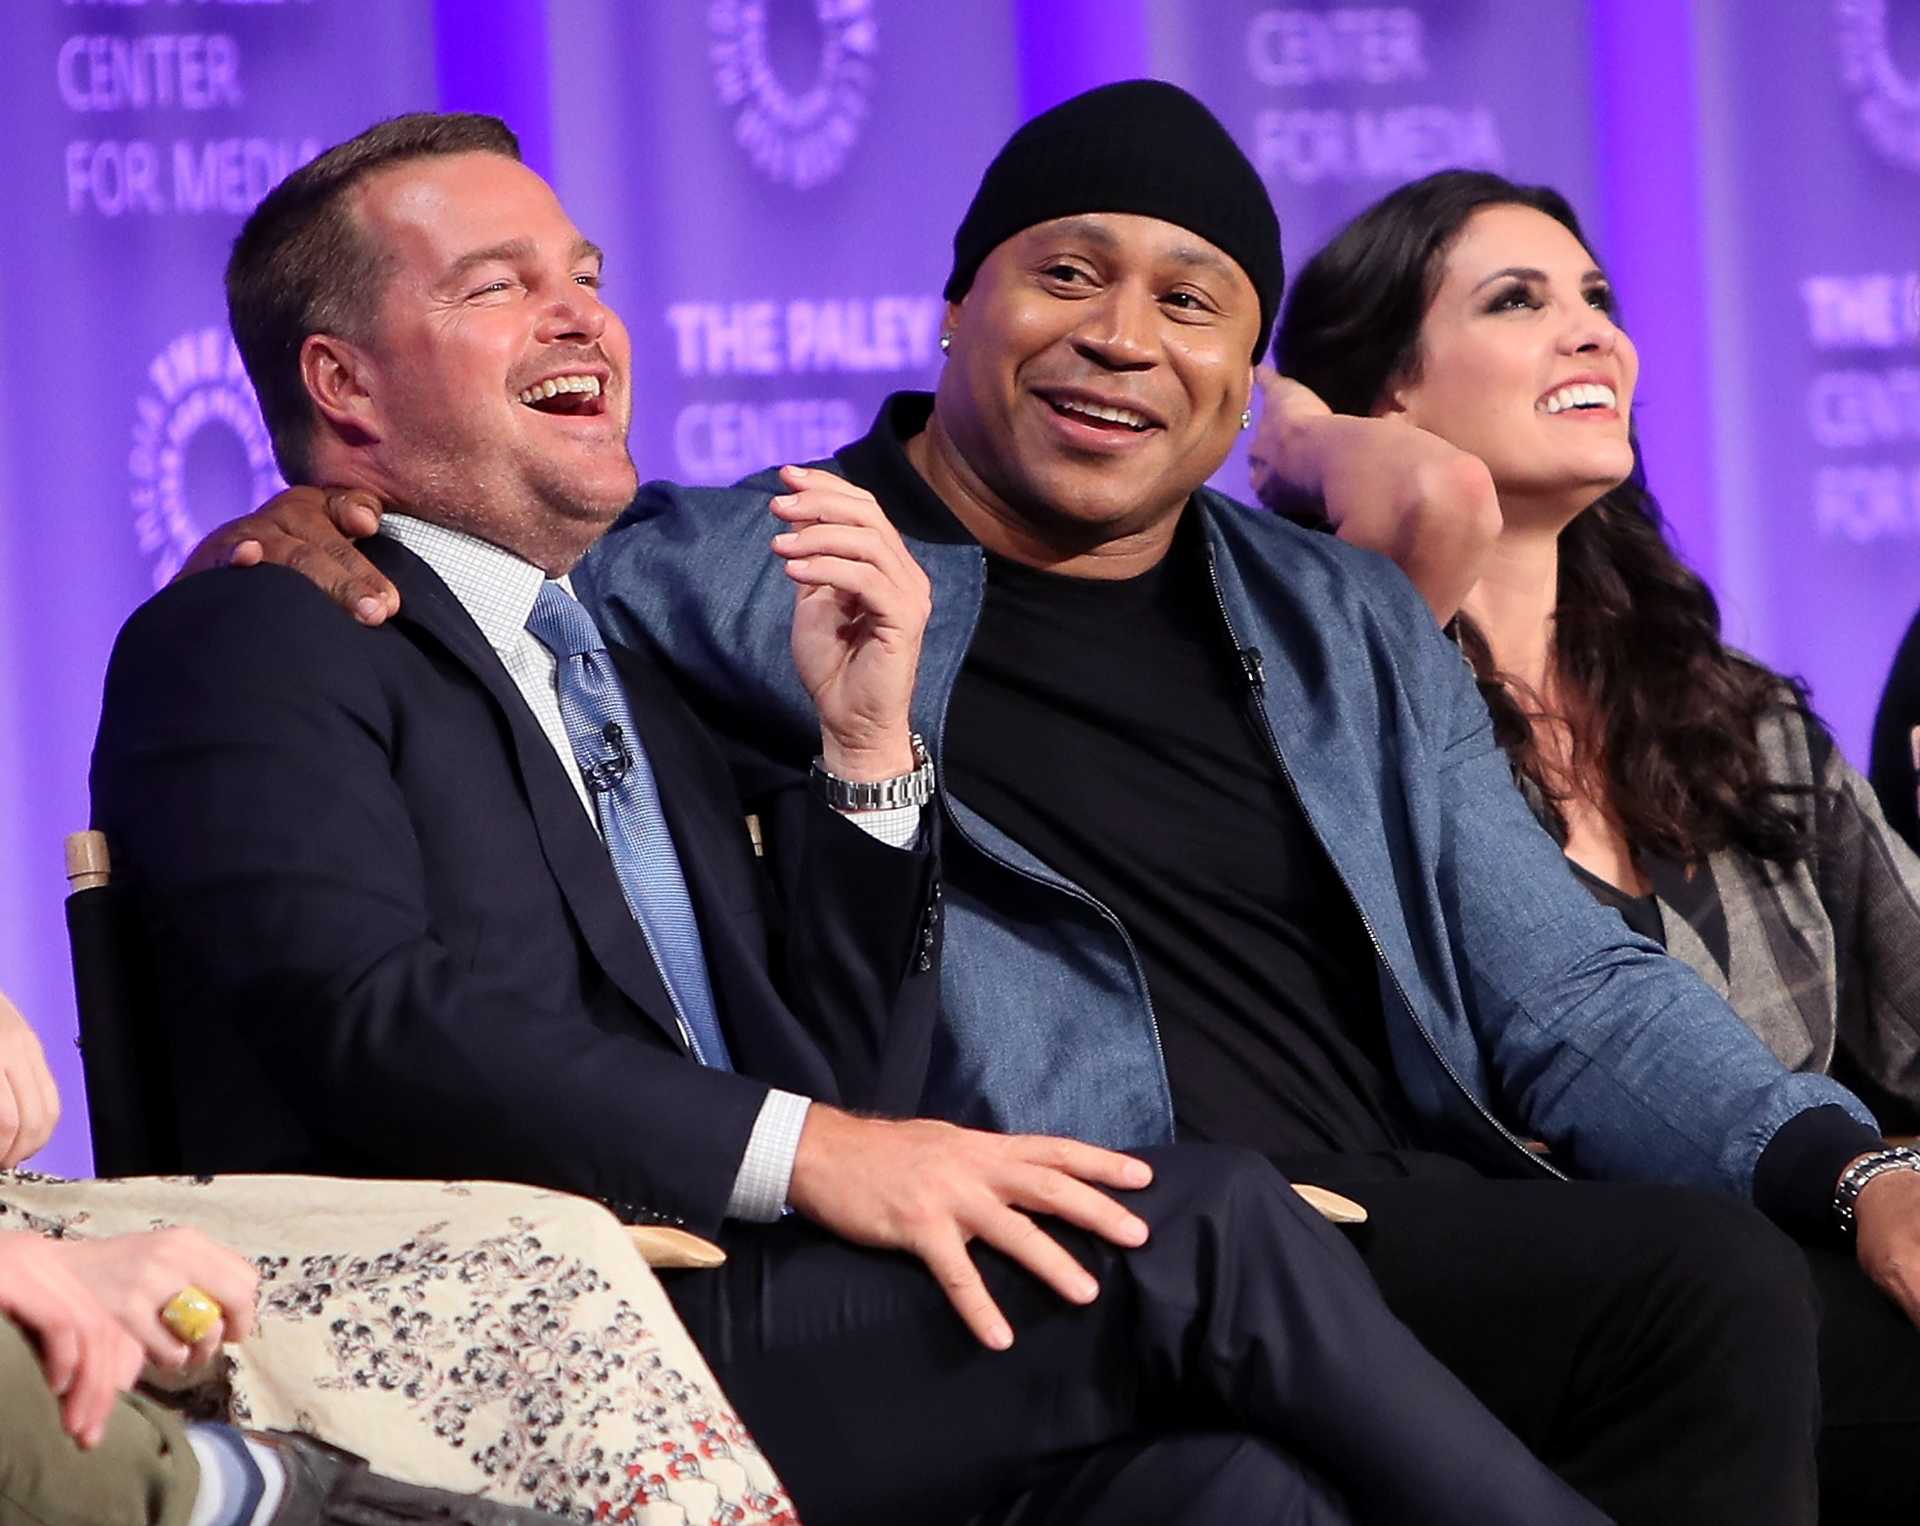 Chris O'Donnell, LL Cool J, and Daniela Ruah | David Livingston/Getty Images